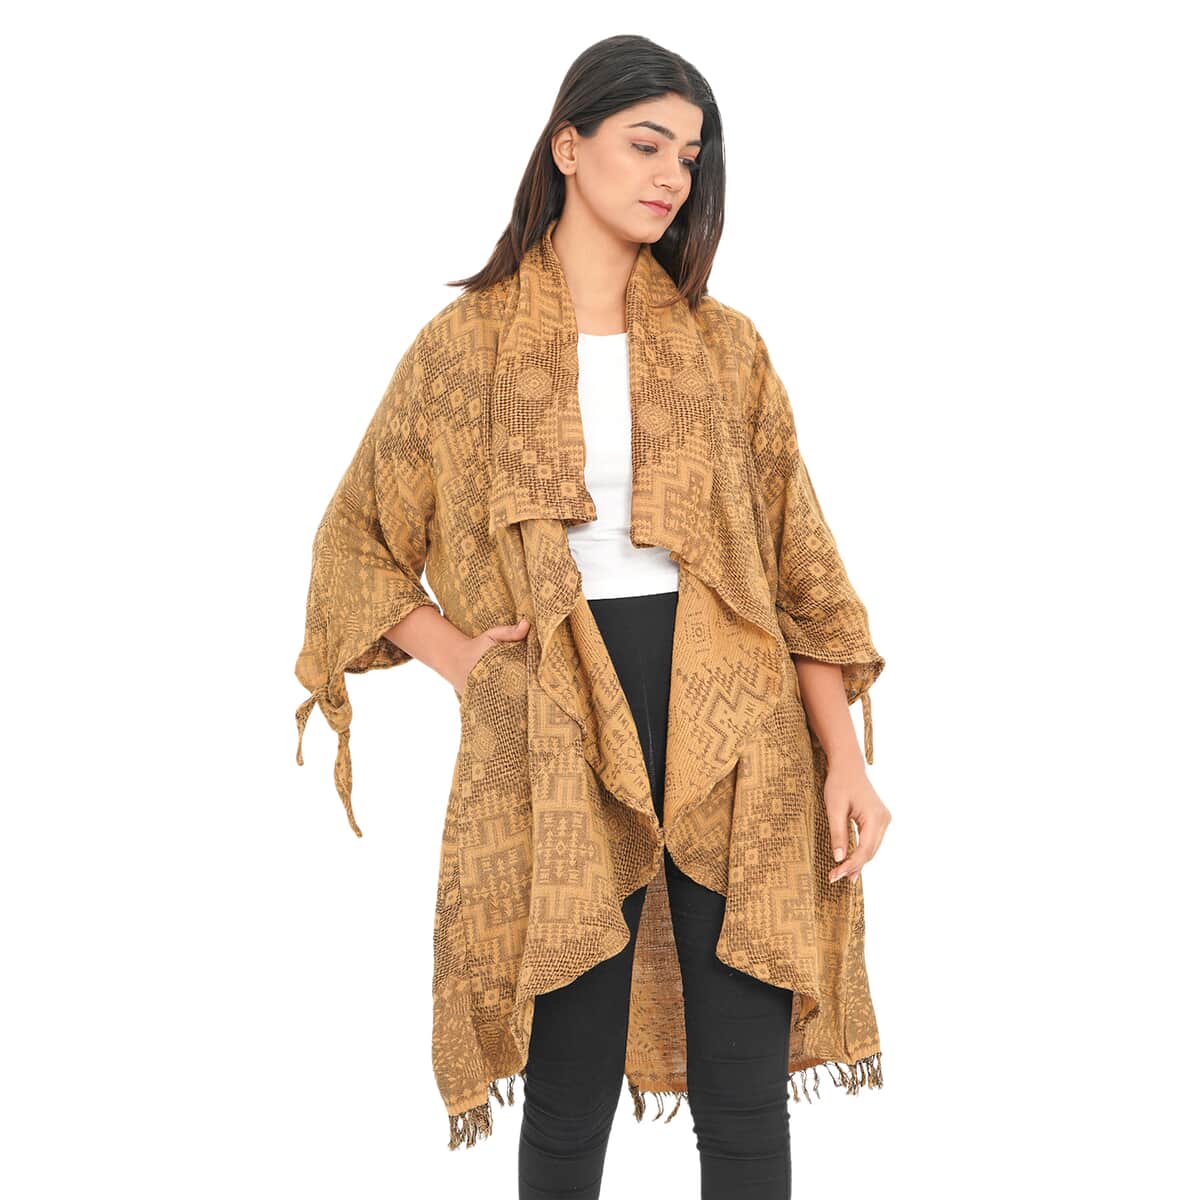 PASSAGE Gold 100% Cotton Double Layer Jacquard Waterfall Front Cardigan - (One size Plus) (35"x29") image number 2